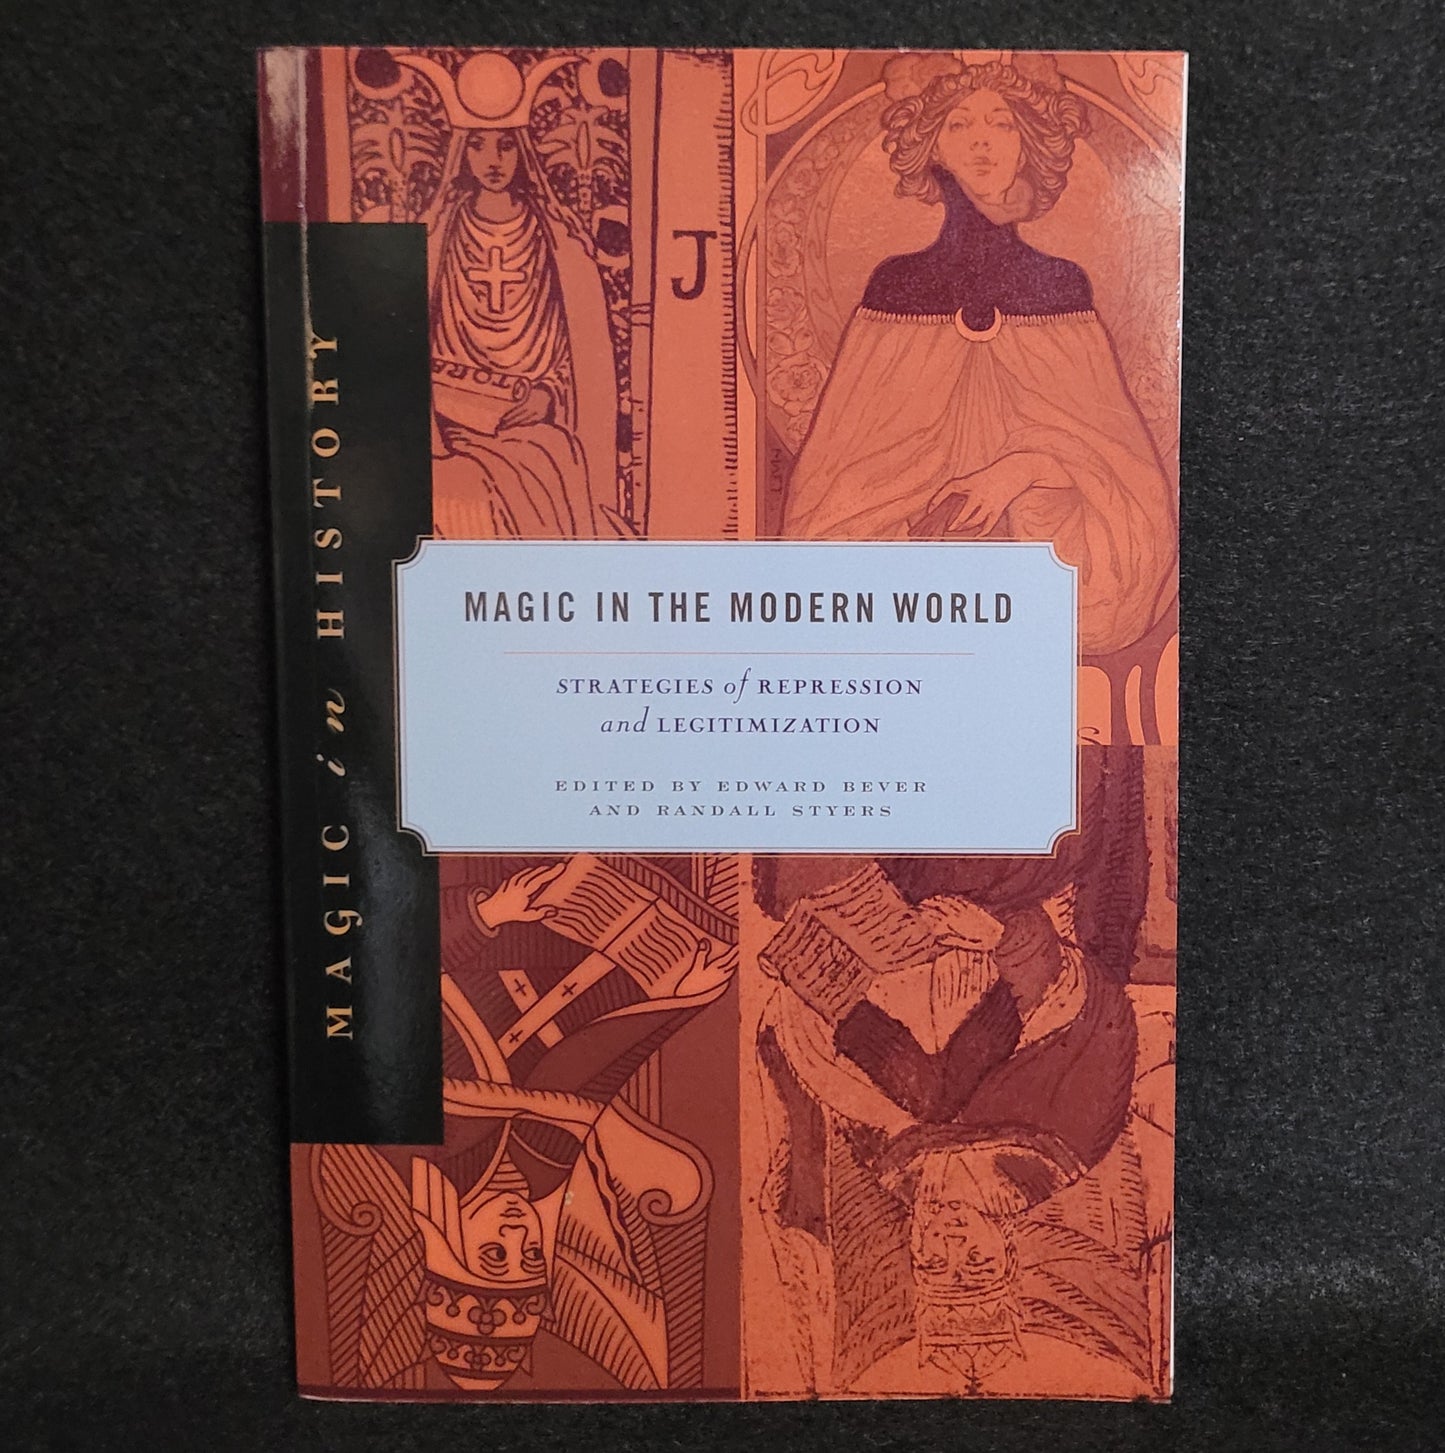 Magic in the Modern World: Strategies of Repression and Legitimization (Magic in History) edited by Edward Bever and Randall Styers (The Pennsylvania State University Press, 2017) Paperback